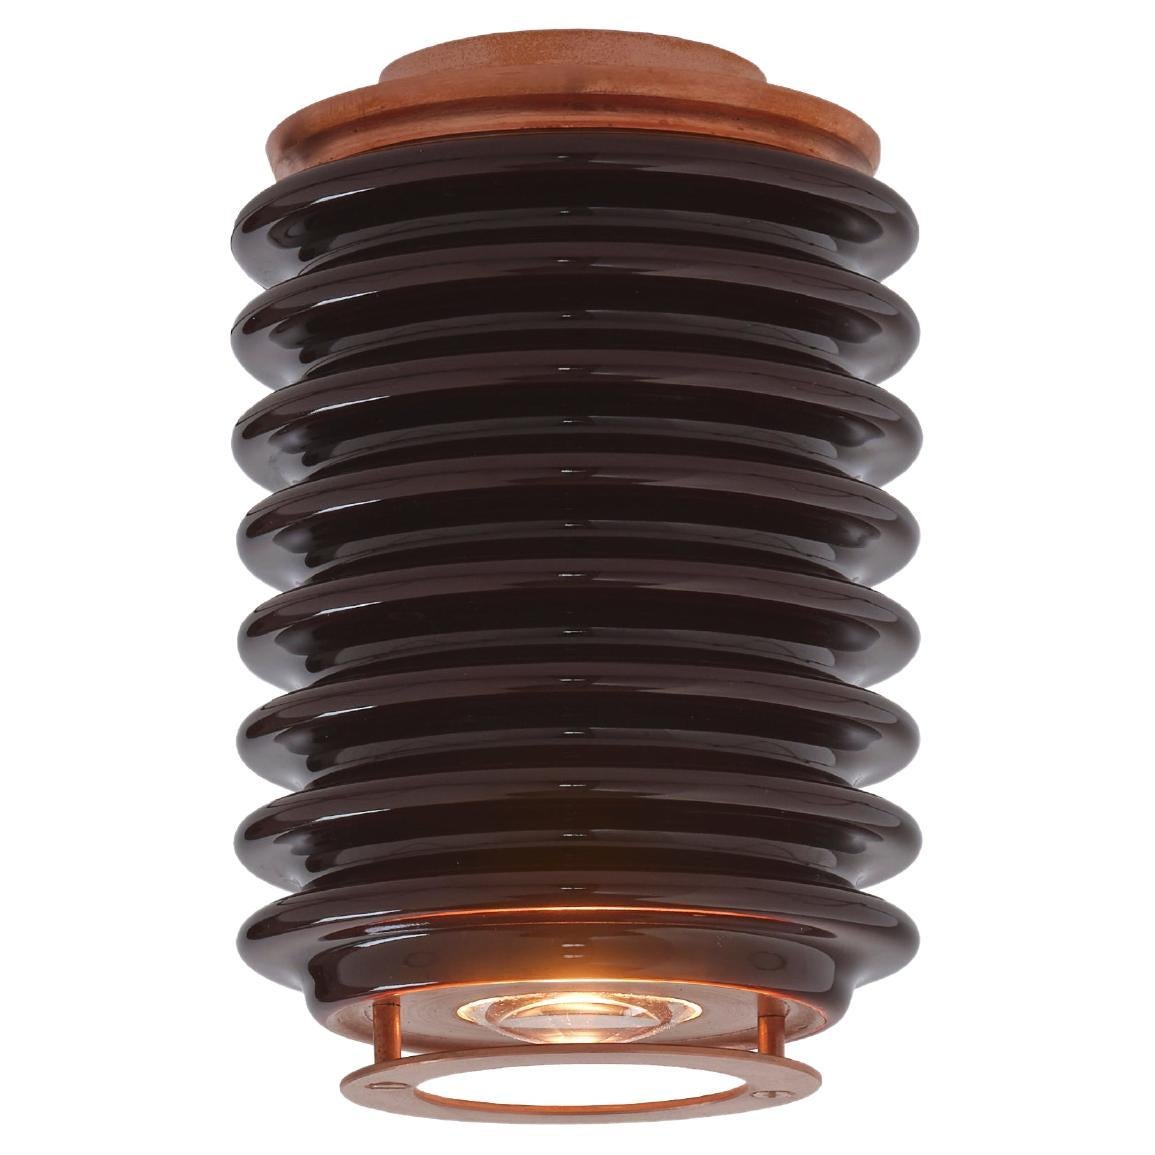 NITA Contemporary Brown Enameled Ceramic & Brushed Copper Ceiling Lights For Sale